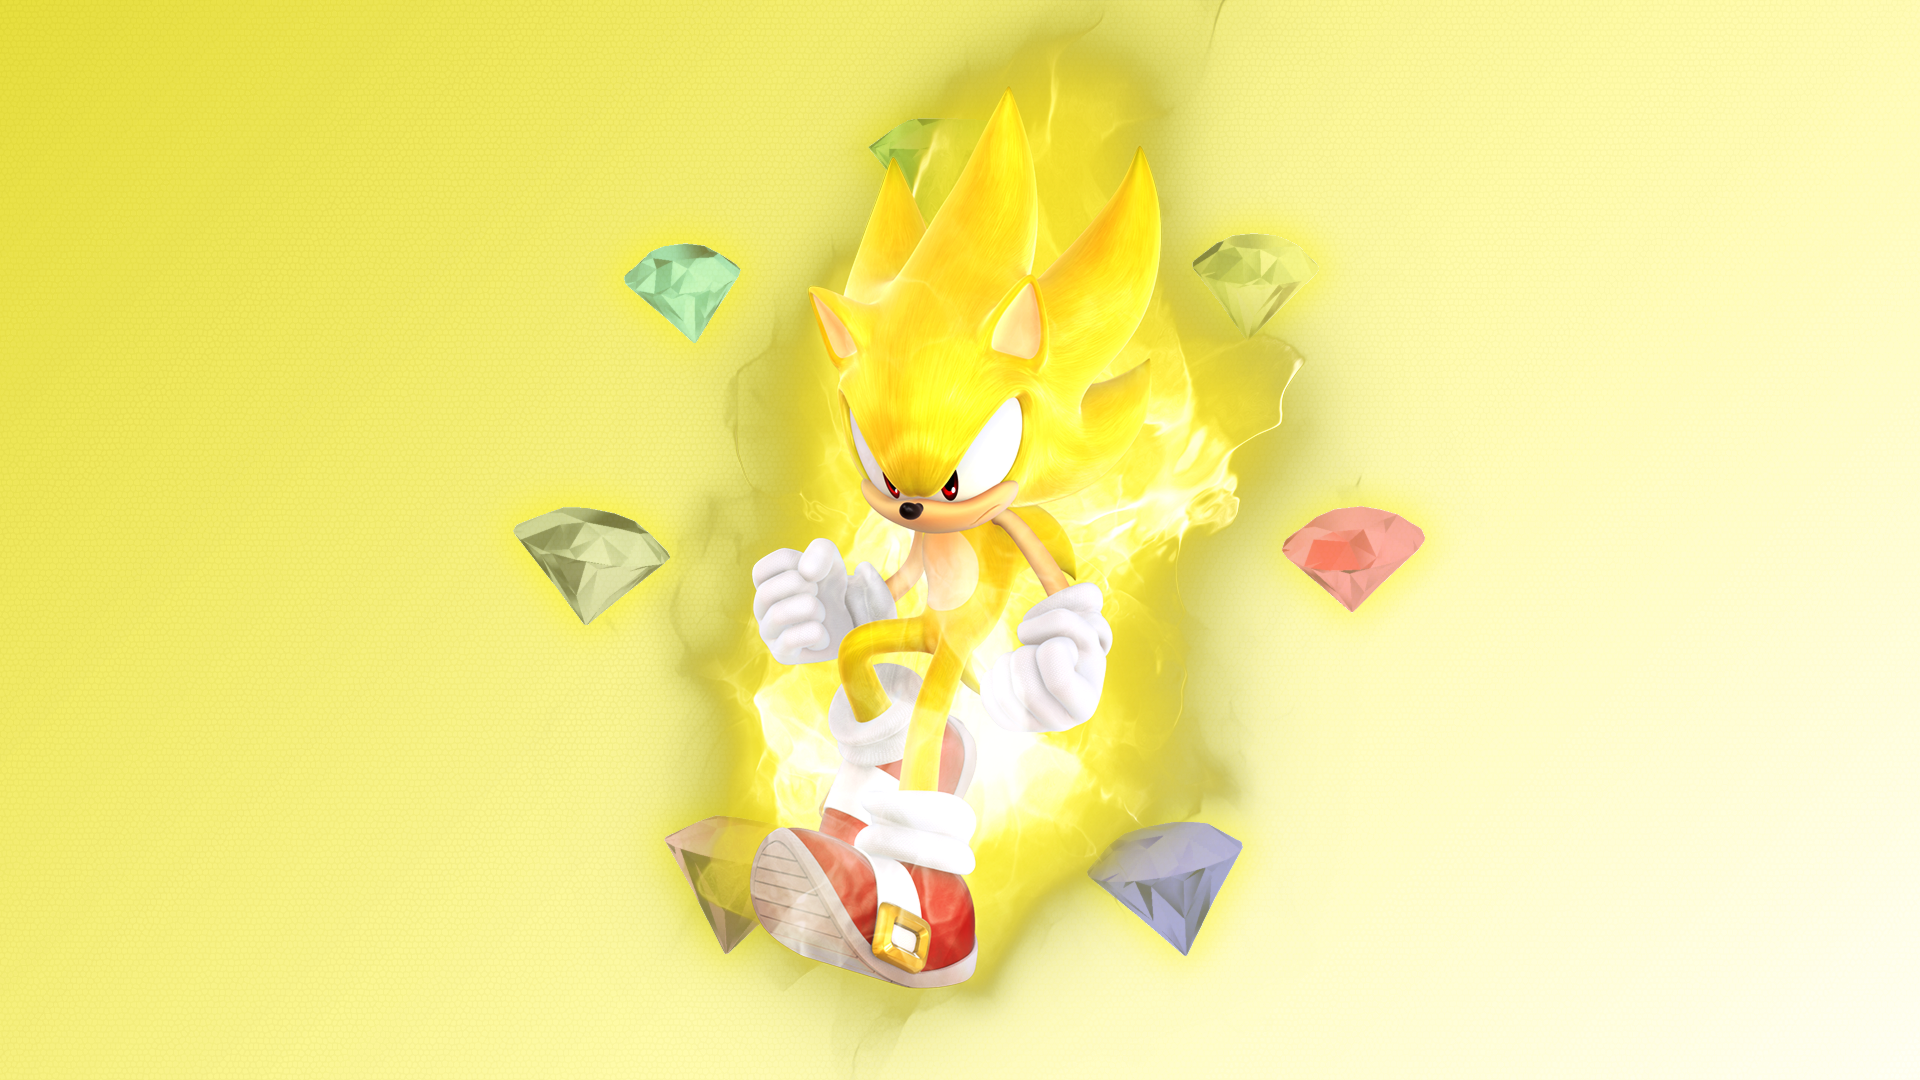 Download Run at the speed of sound with Super Sonic Wallpaper   Wallpaperscom